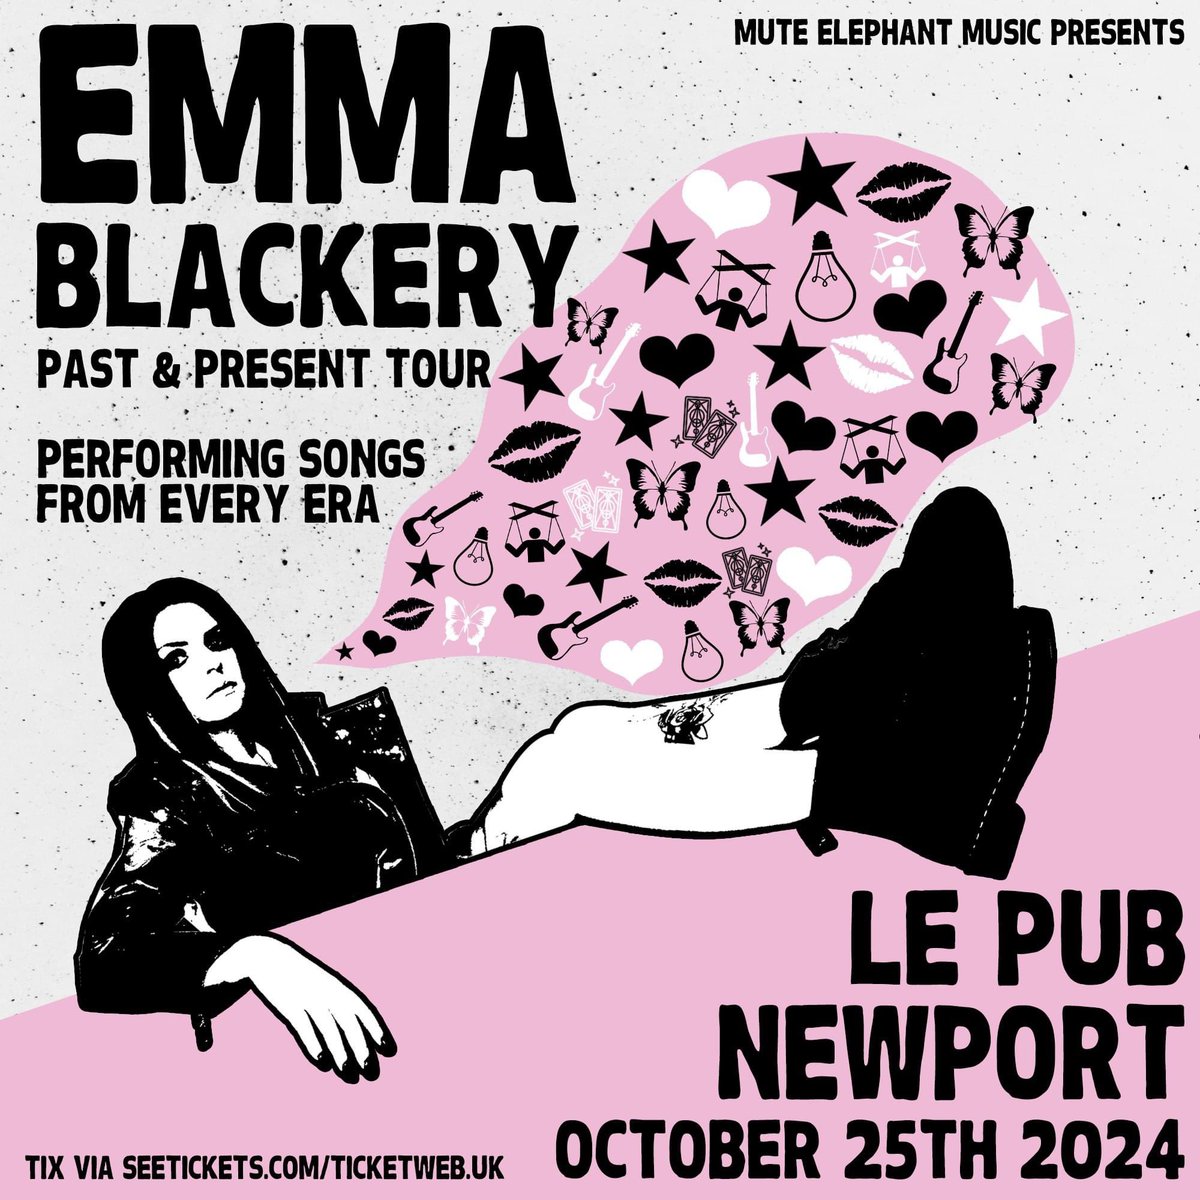 😍 Just announced! 😍 @emmablackery is coming to Le Pub on 25th October 2024 😁 With a musical career spanning over ten years, Emma will be performing songs from every release for the very first time on the all-new Past & Present tour. After creating her YouTube channel in…